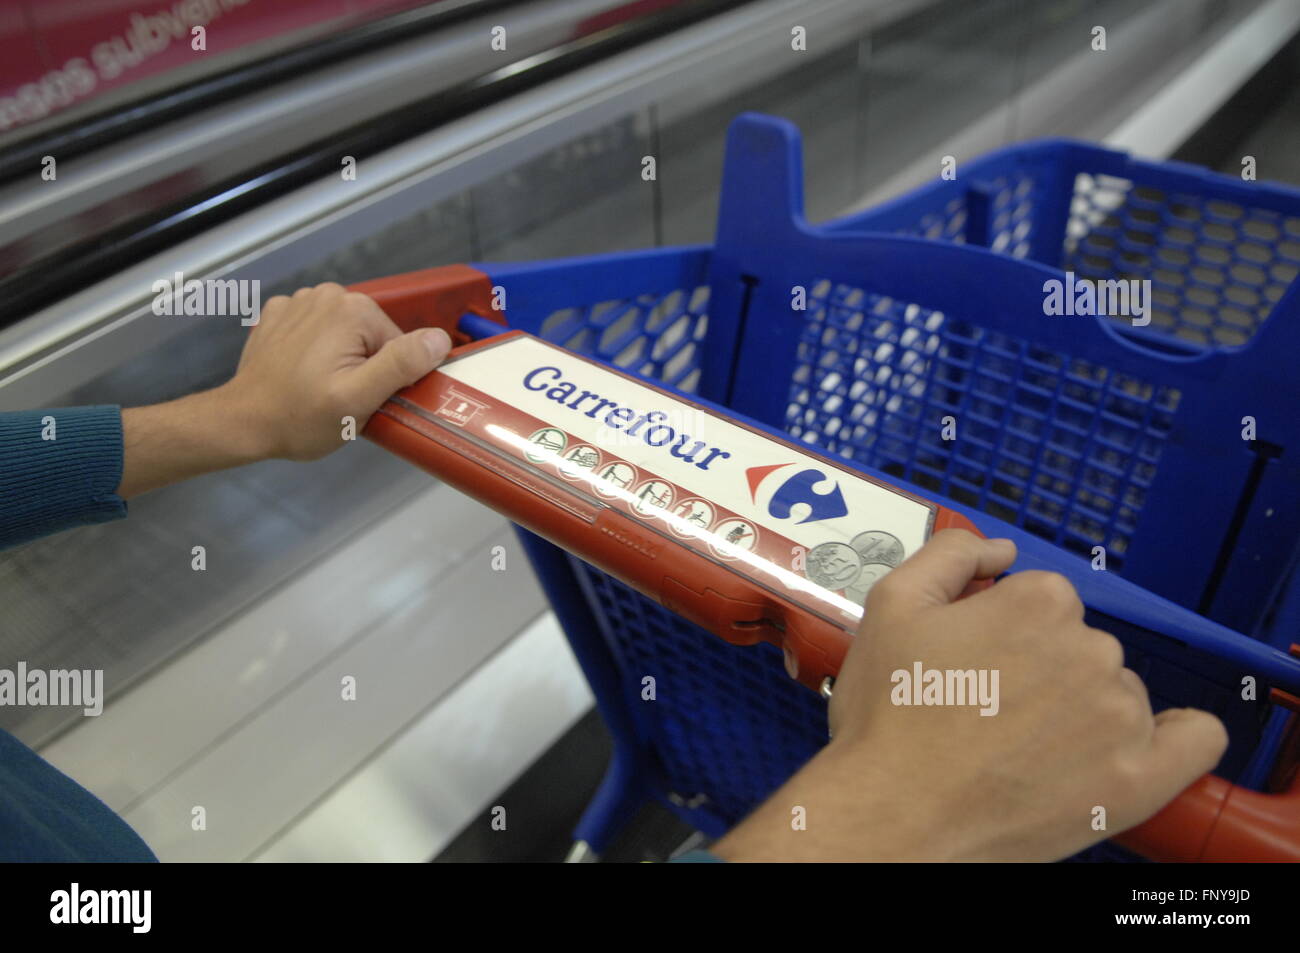 Carrefour Shopping Trolley being pushed on Escalator Stock Photo